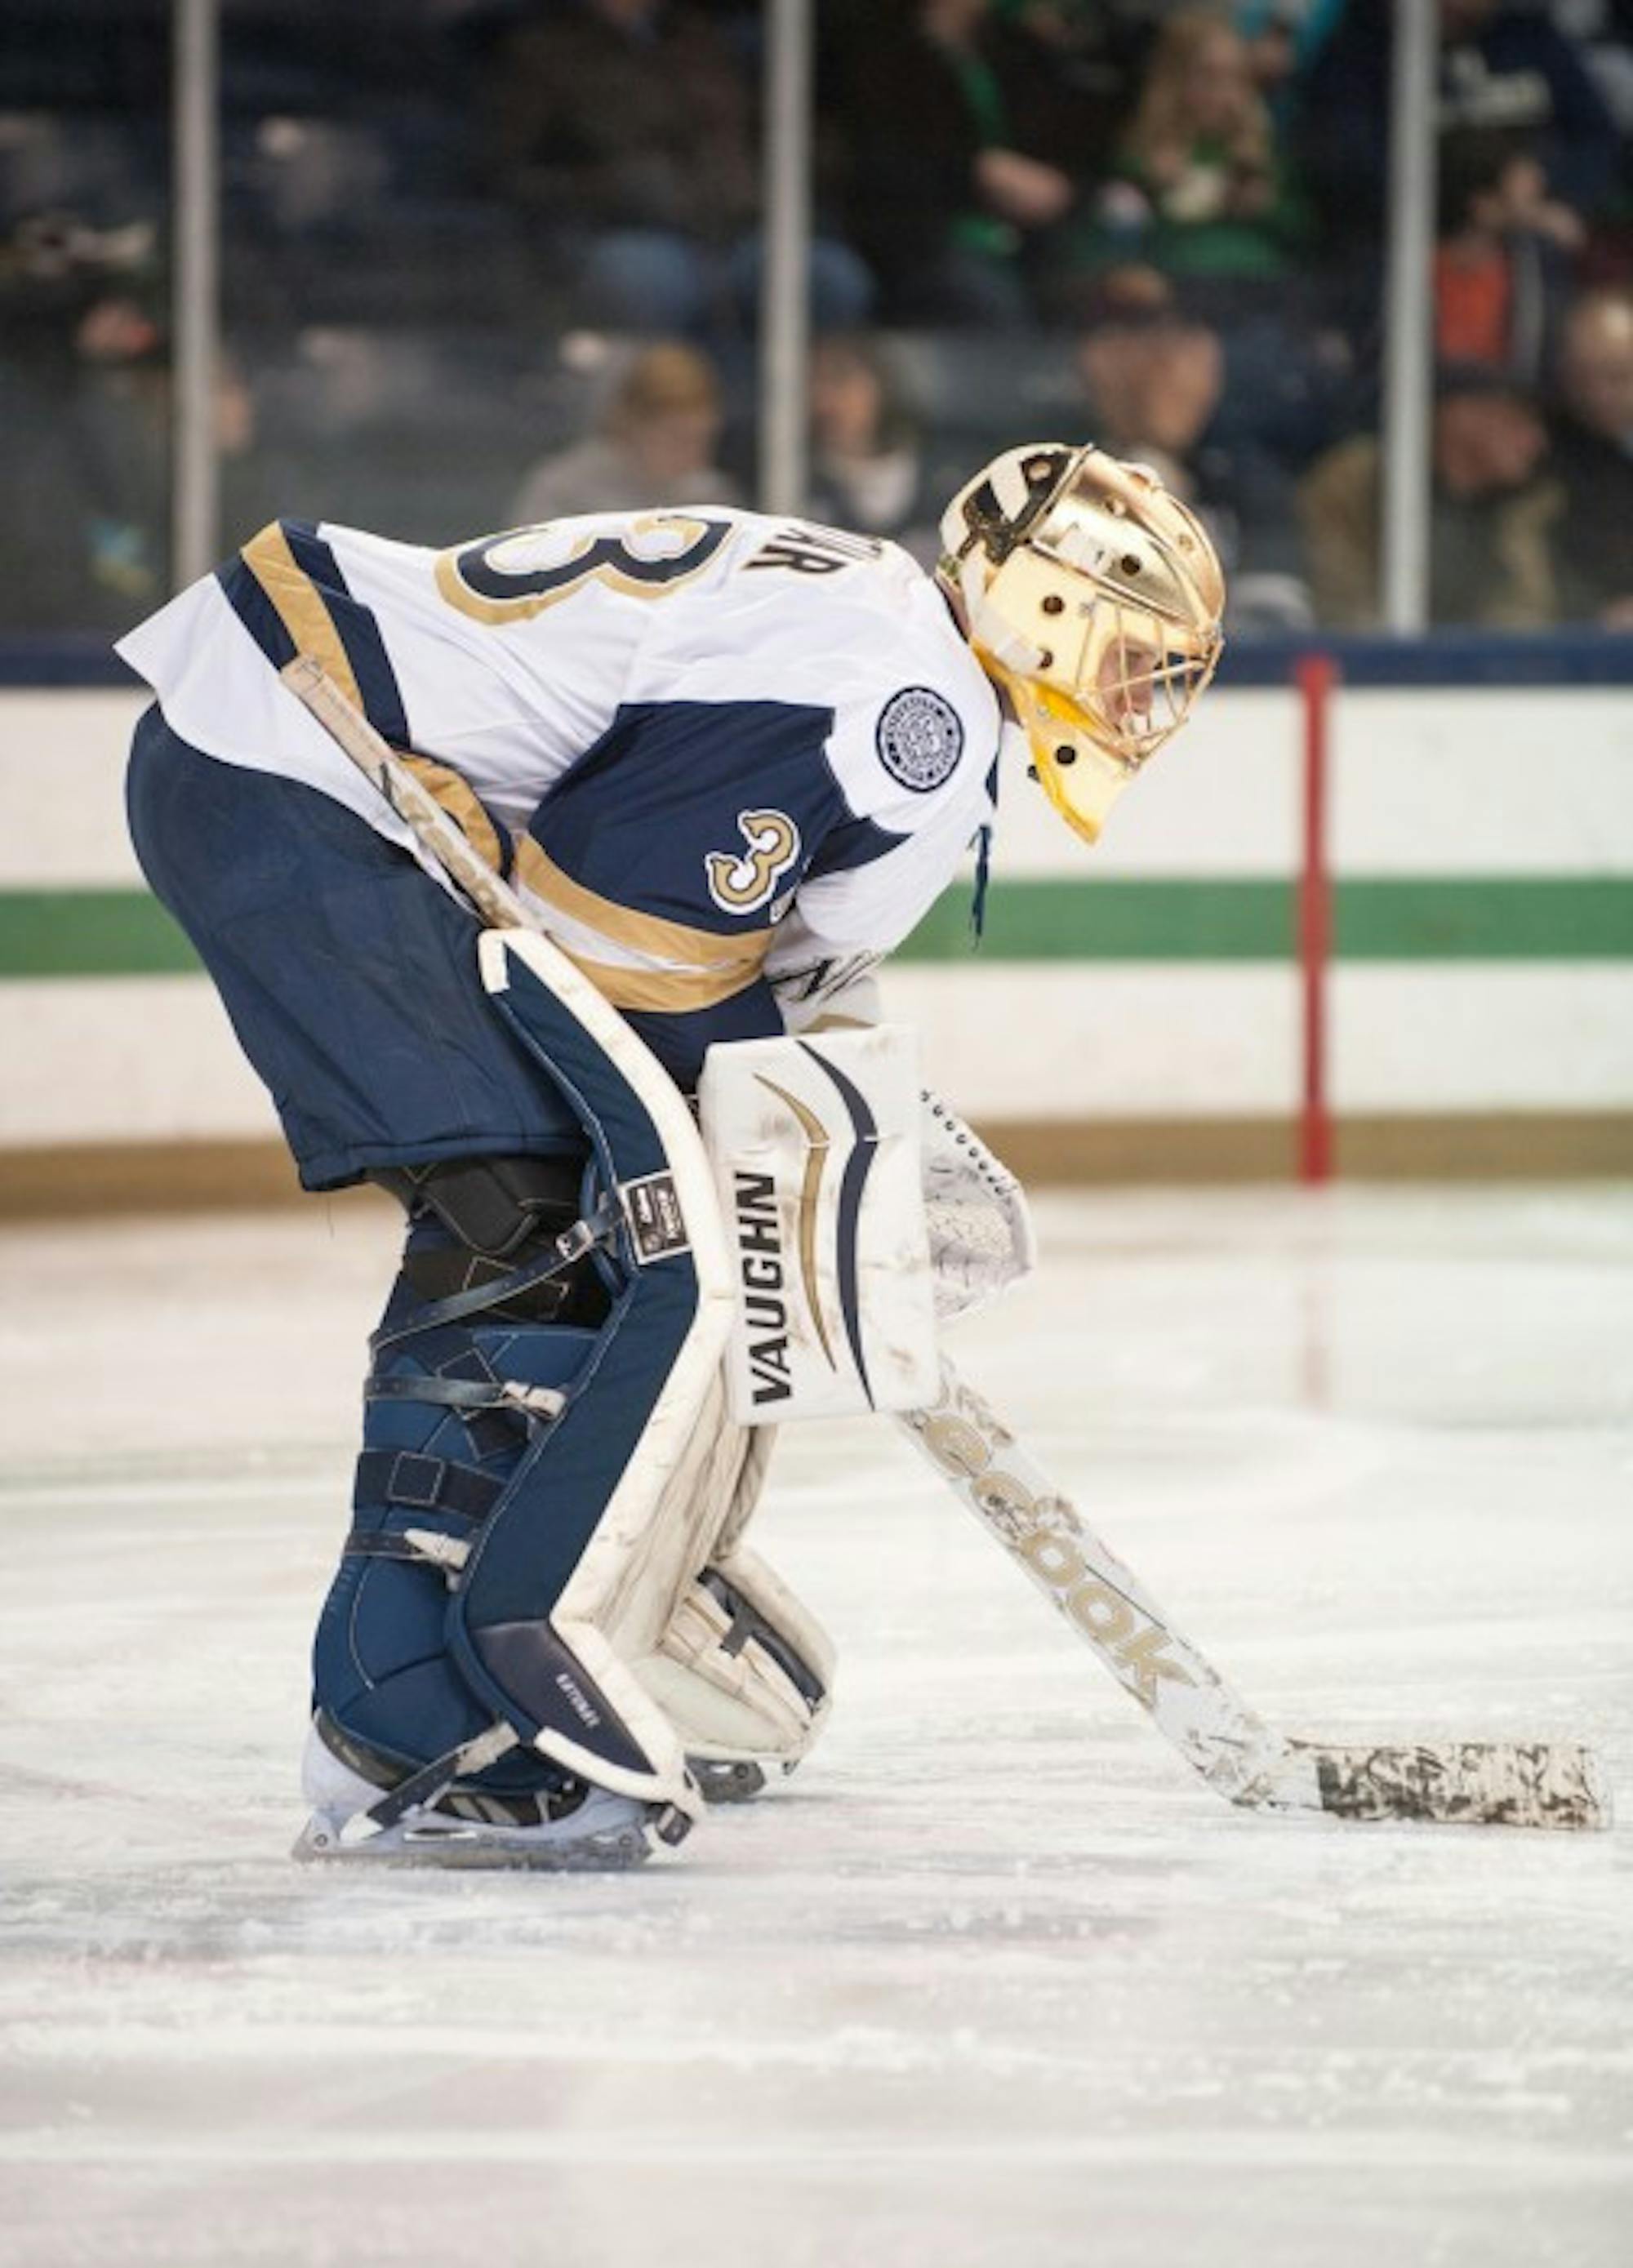 Sophomore Chad Katunar guards the goal against New Hampshire on Jan. 30. The Irish sit at 12-14-4 overall this season.